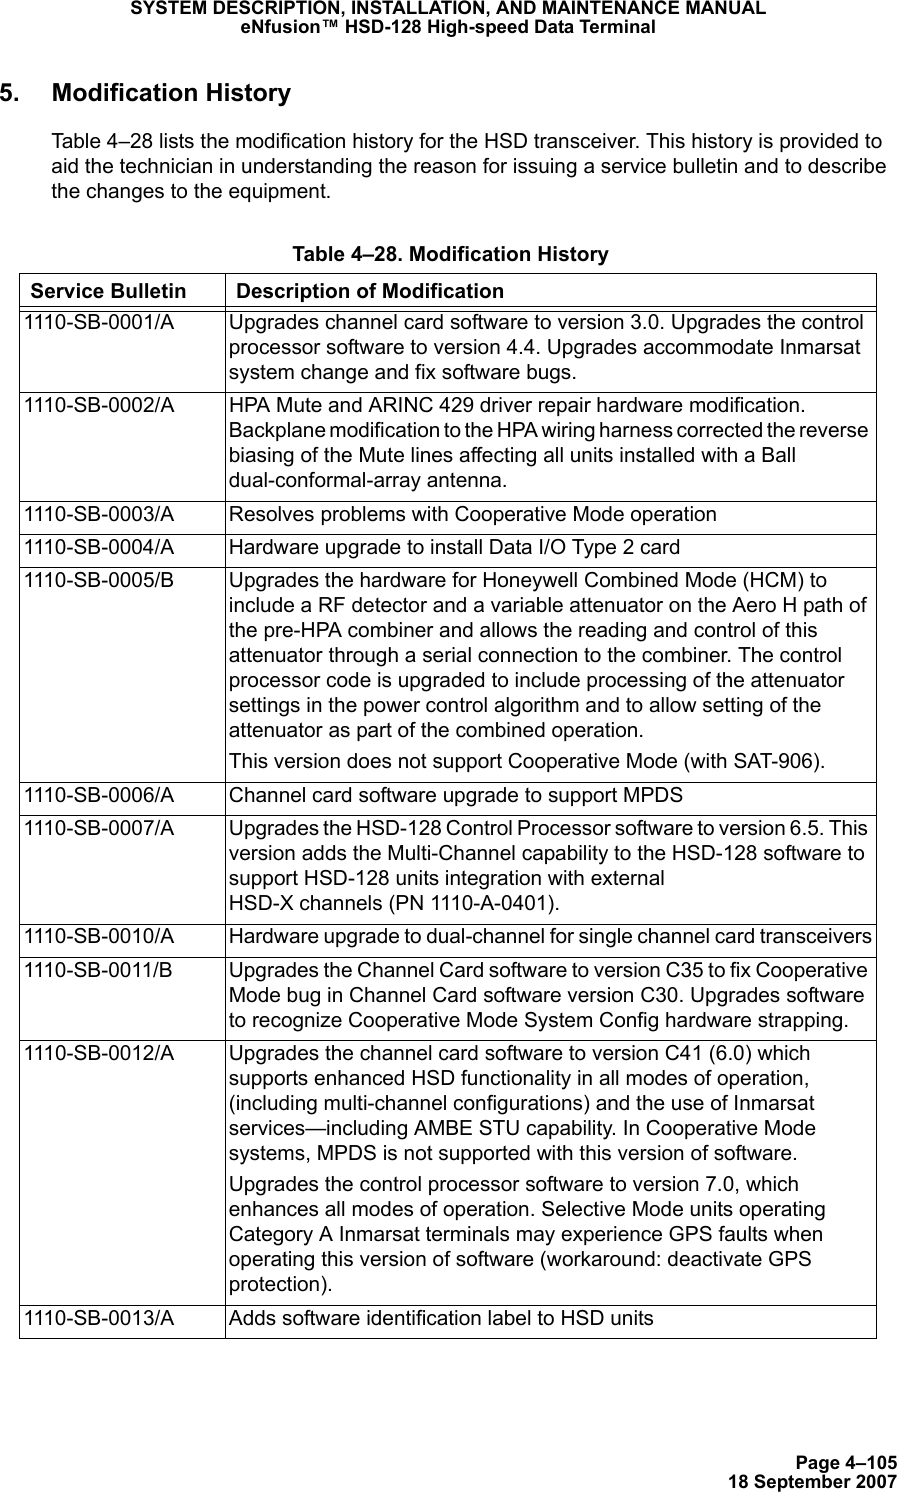 Page 4–10518 September 2007SYSTEM DESCRIPTION, INSTALLATION, AND MAINTENANCE MANUALeNfusion™ HSD-128 High-speed Data Terminal5. Modification HistoryTable 4–28 lists the modification history for the HSD transceiver. This history is provided to aid the technician in understanding the reason for issuing a service bulletin and to describe the changes to the equipment. Table 4–28. Modification HistoryService Bulletin Description of Modification1110-SB-0001/A Upgrades channel card software to version 3.0. Upgrades the control processor software to version 4.4. Upgrades accommodate Inmarsat system change and fix software bugs.1110-SB-0002/A HPA Mute and ARINC 429 driver repair hardware modification. Backplane modification to the HPA wiring harness corrected the reverse biasing of the Mute lines affecting all units installed with a Ball dual-conformal-array antenna.1110-SB-0003/A Resolves problems with Cooperative Mode operation1110-SB-0004/A Hardware upgrade to install Data I/O Type 2 card1110-SB-0005/B Upgrades the hardware for Honeywell Combined Mode (HCM) to include a RF detector and a variable attenuator on the Aero H path of the pre-HPA combiner and allows the reading and control of this attenuator through a serial connection to the combiner. The control processor code is upgraded to include processing of the attenuator settings in the power control algorithm and to allow setting of the attenuator as part of the combined operation. This version does not support Cooperative Mode (with SAT-906).1110-SB-0006/A Channel card software upgrade to support MPDS 1110-SB-0007/A Upgrades the HSD-128 Control Processor software to version 6.5. This version adds the Multi-Channel capability to the HSD-128 software to support HSD-128 units integration with external HSD-X channels (PN 1110-A-0401).1110-SB-0010/A Hardware upgrade to dual-channel for single channel card transceivers1110-SB-0011/B Upgrades the Channel Card software to version C35 to fix Cooperative Mode bug in Channel Card software version C30. Upgrades software to recognize Cooperative Mode System Config hardware strapping. 1110-SB-0012/A Upgrades the channel card software to version C41 (6.0) which supports enhanced HSD functionality in all modes of operation, (including multi-channel configurations) and the use of Inmarsat services—including AMBE STU capability. In Cooperative Mode systems, MPDS is not supported with this version of software.Upgrades the control processor software to version 7.0, which enhances all modes of operation. Selective Mode units operating Category A Inmarsat terminals may experience GPS faults when operating this version of software (workaround: deactivate GPS protection).1110-SB-0013/A Adds software identification label to HSD units